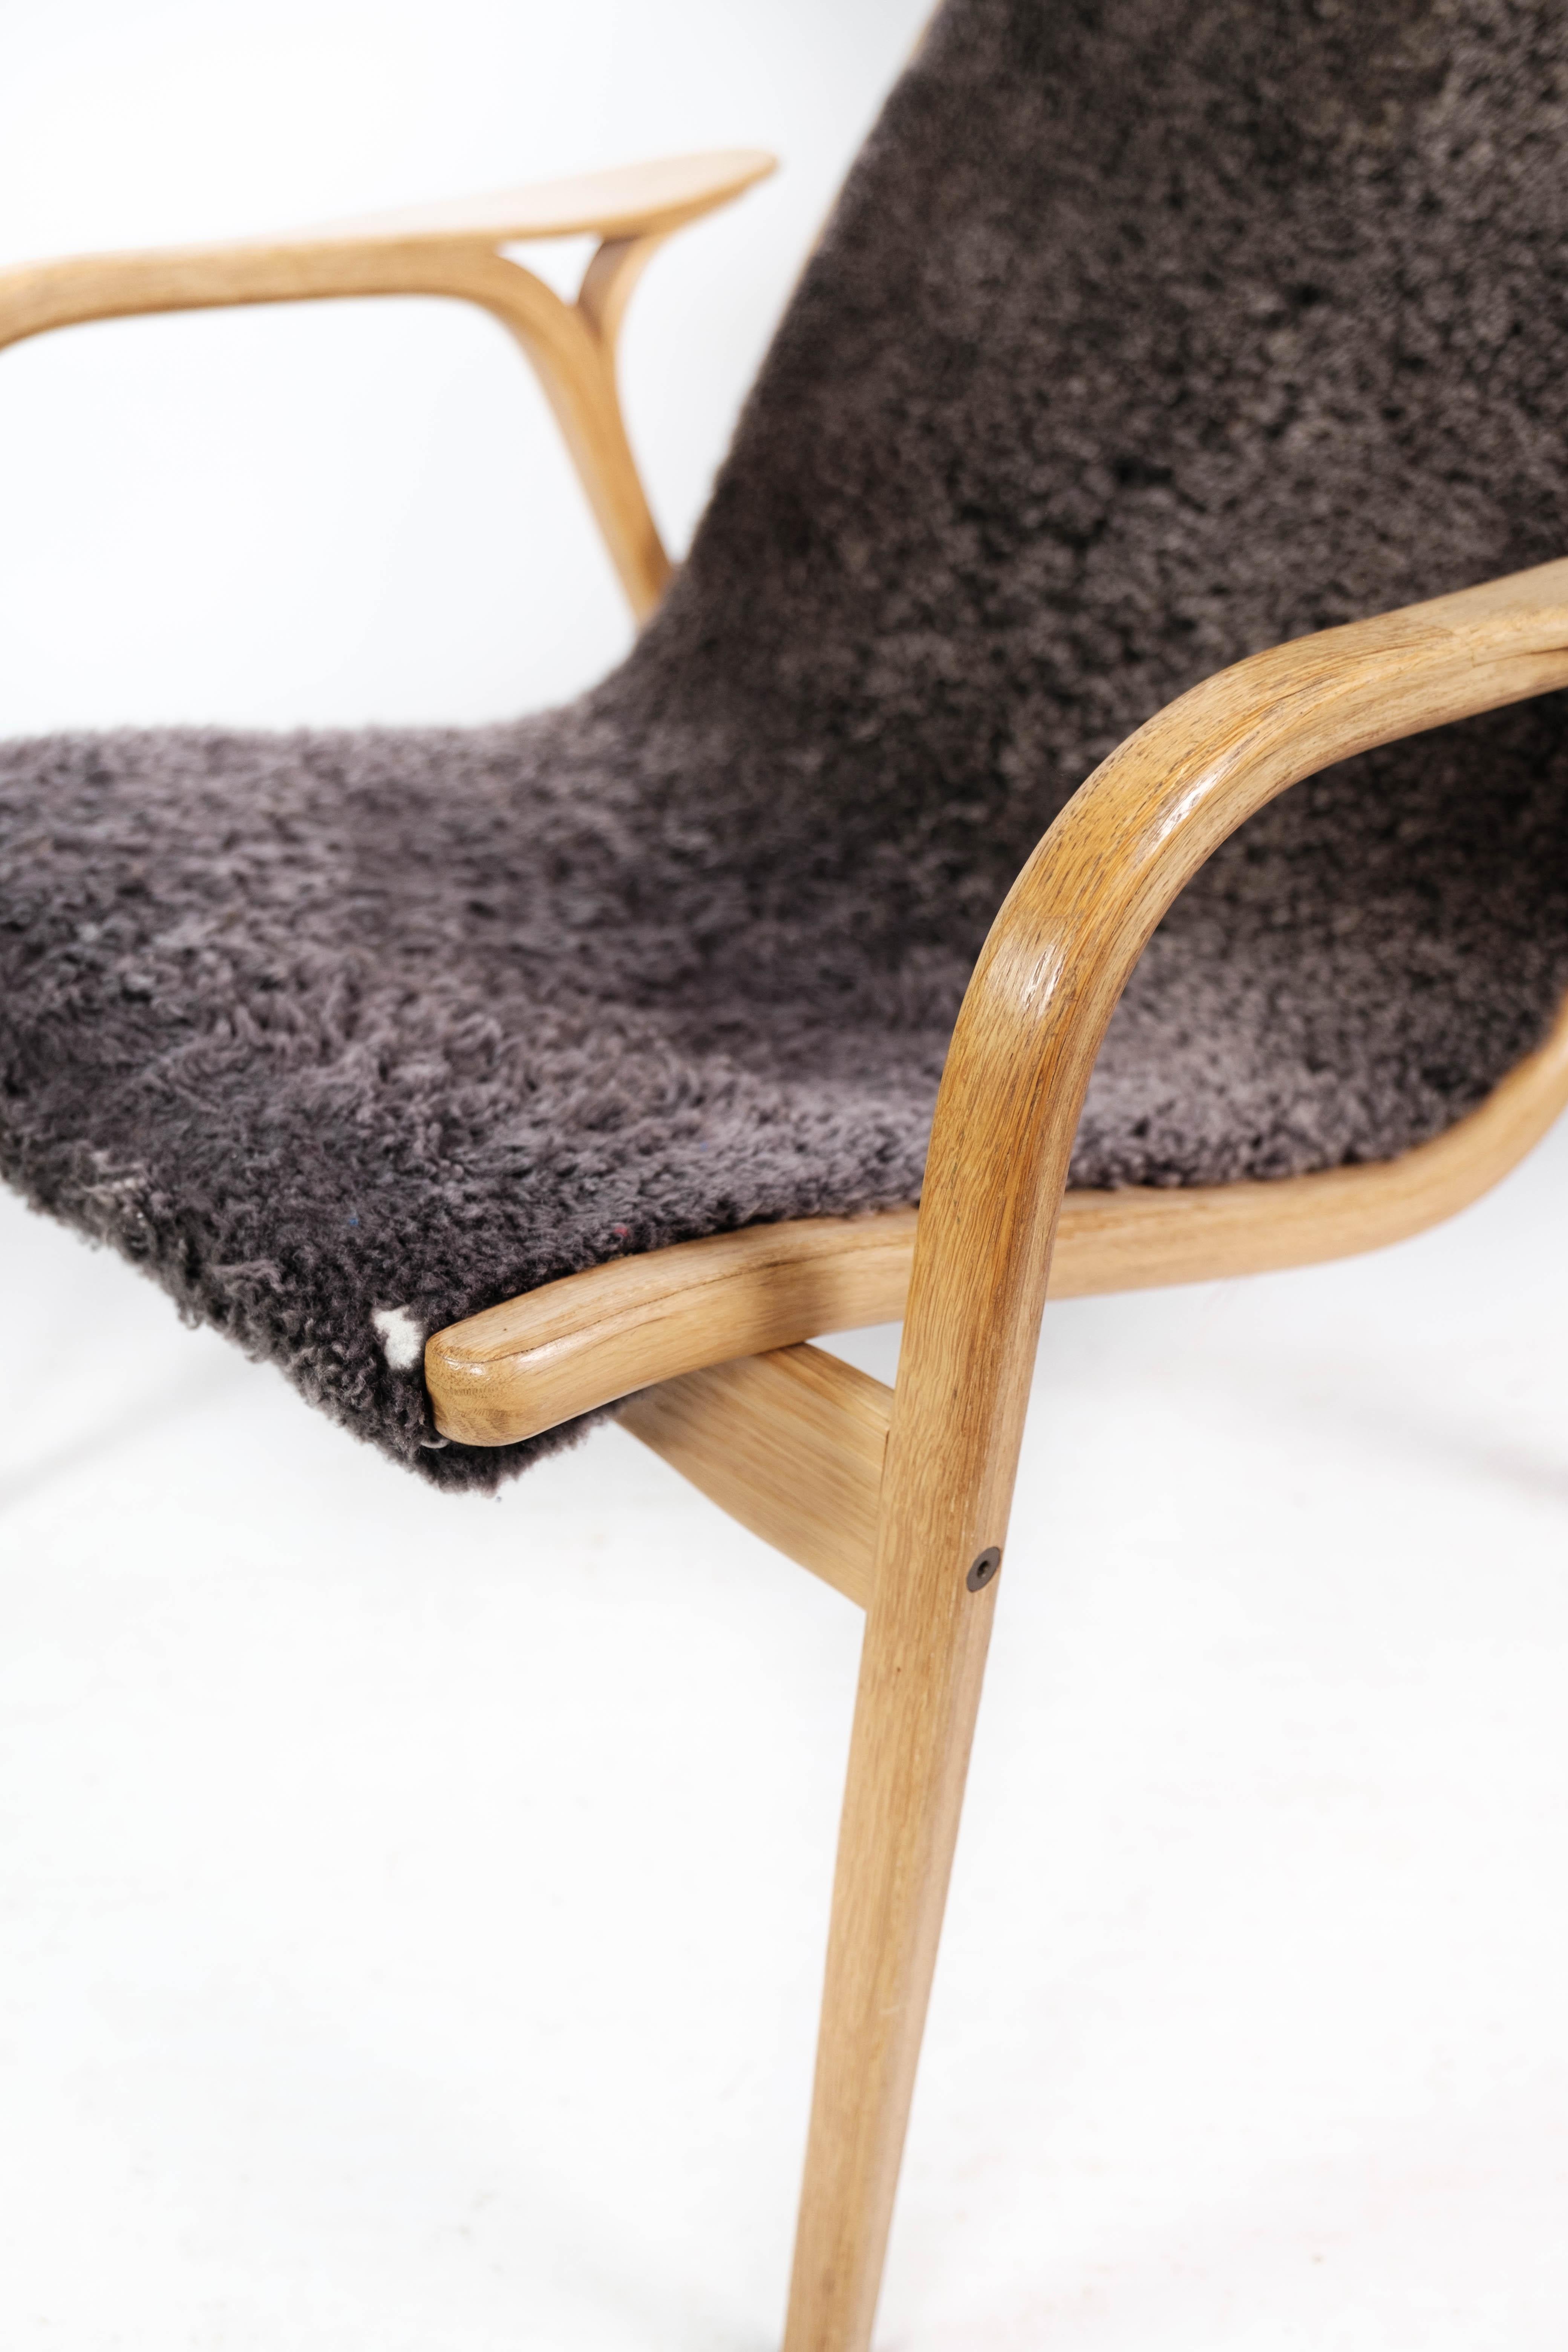 Easy chair, model Lamino, designed by Yngve Ekström and manufactured by Swedese in the 1950s. The chair is in great vintage condition and with sheep skin.